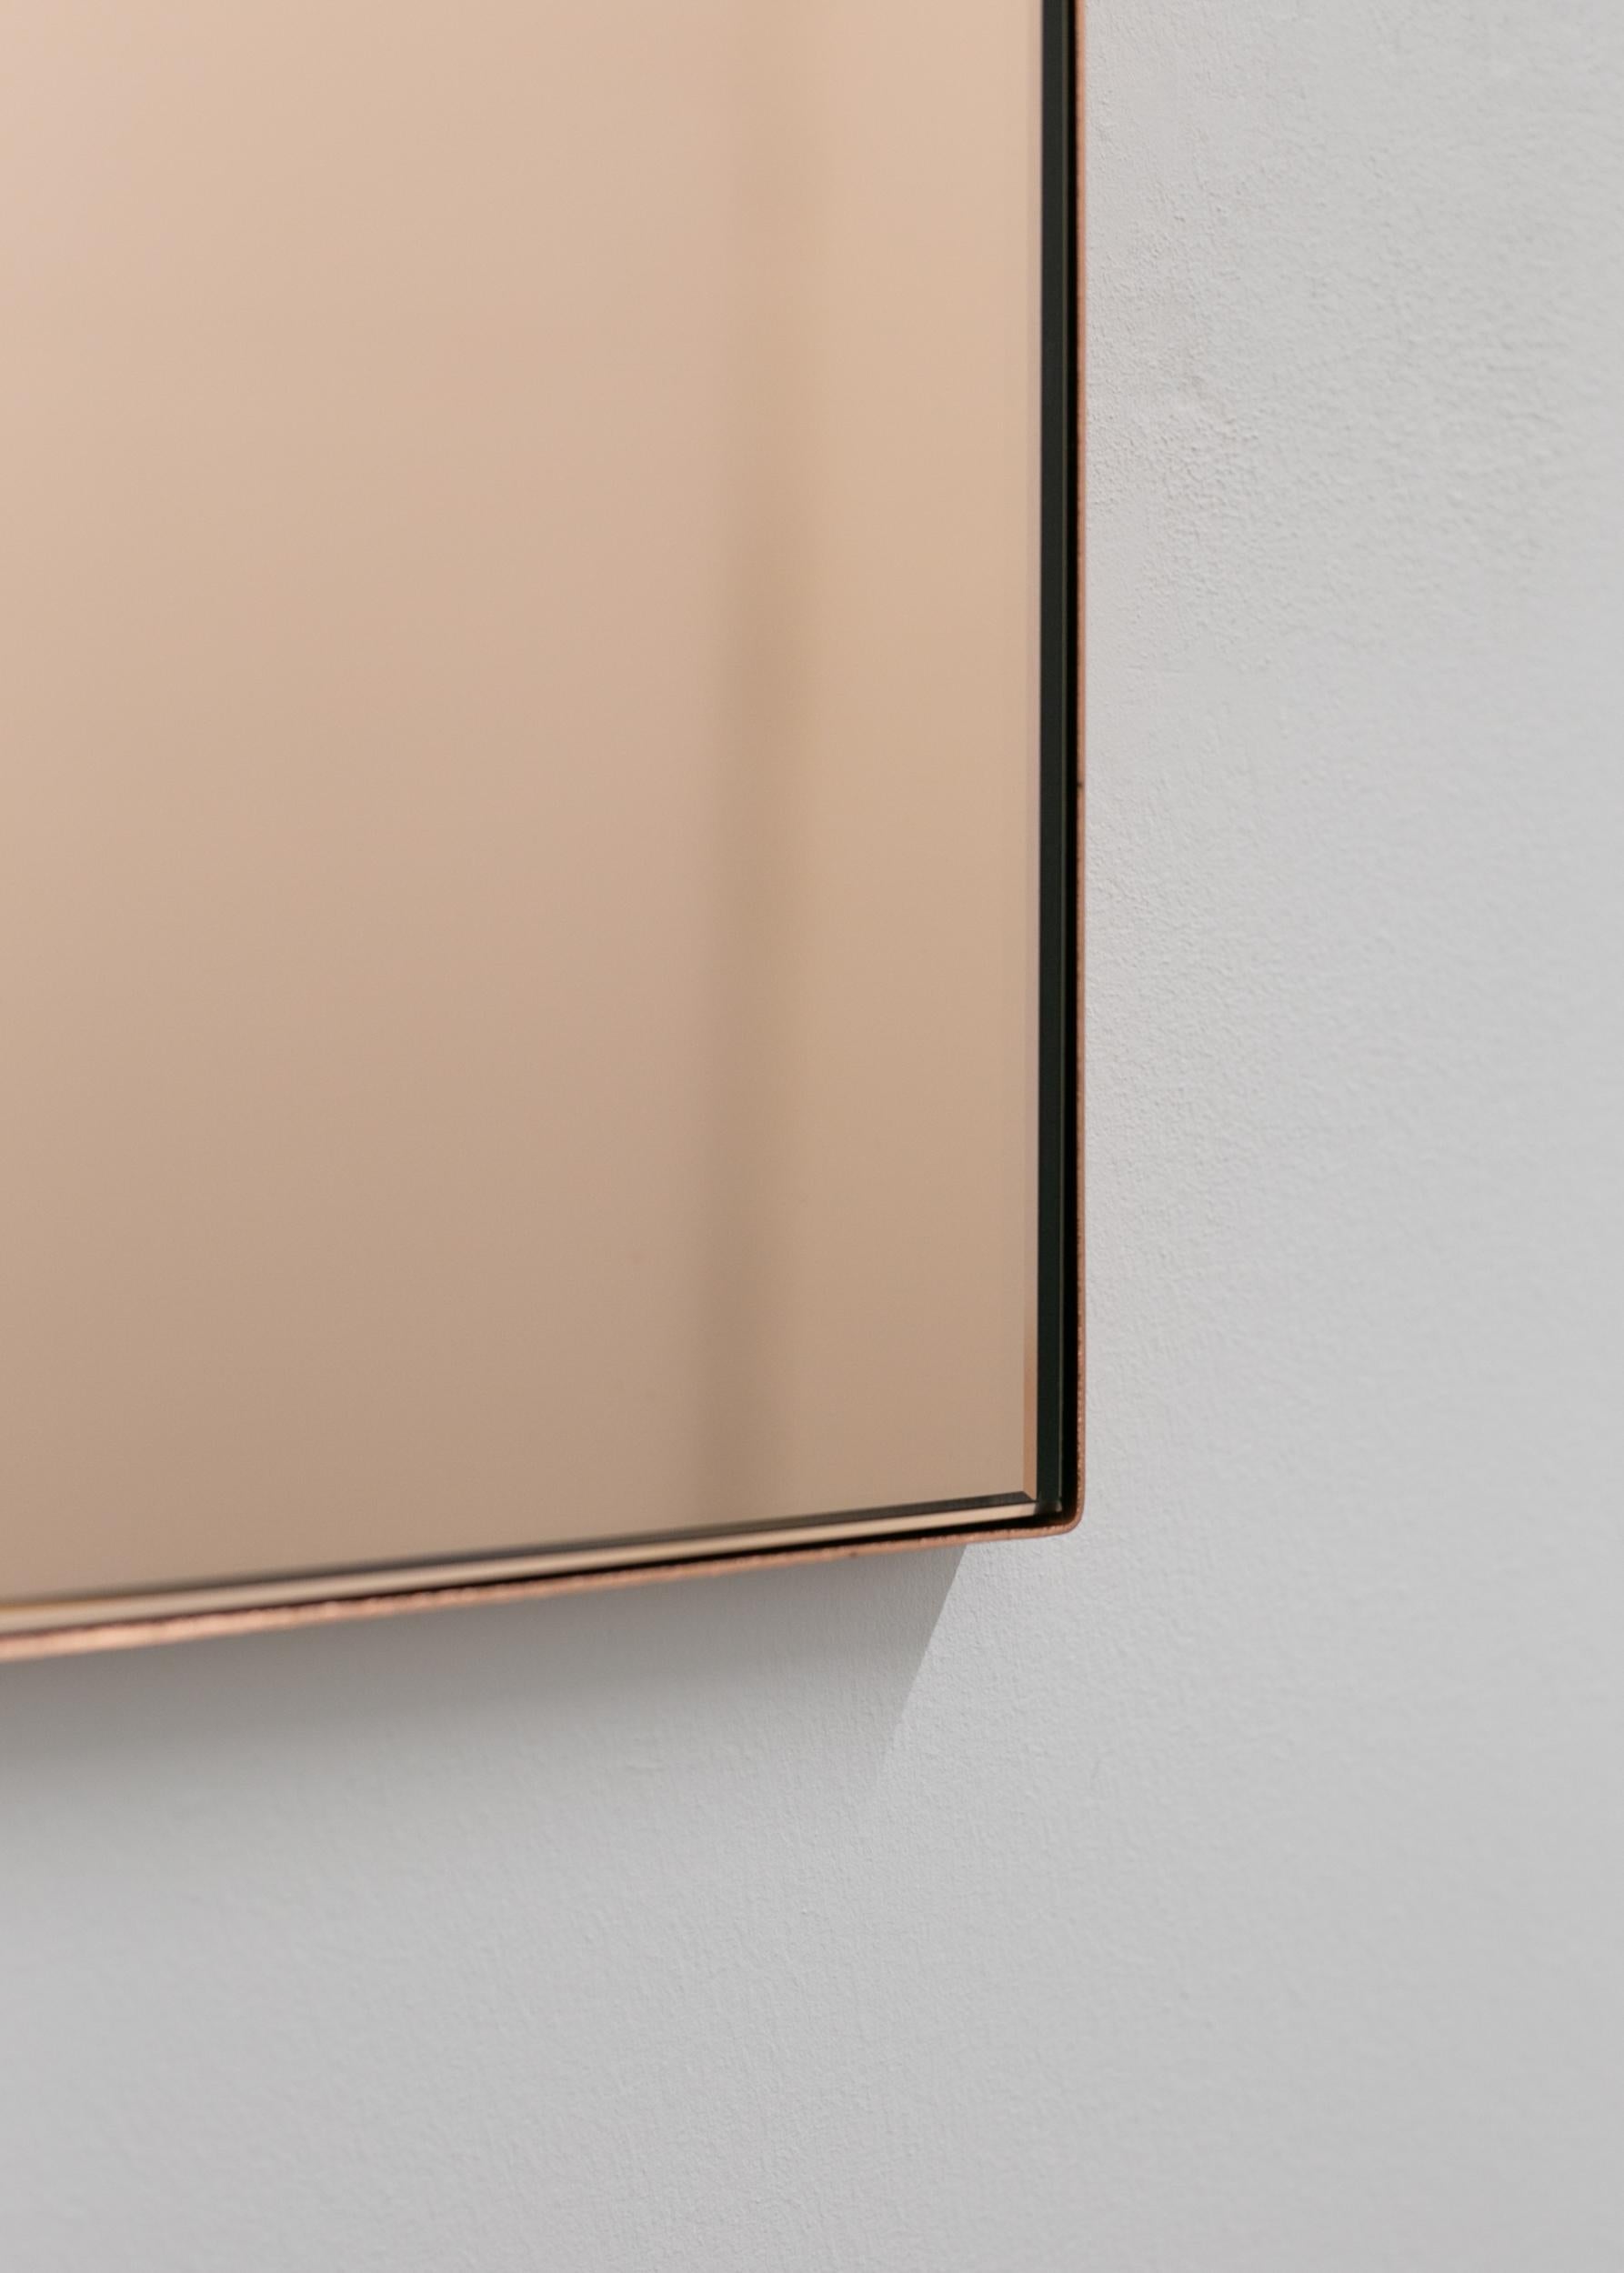 British Arcus Arch shaped Rose Gold Modern Mirror with a Copper Frame, Small For Sale